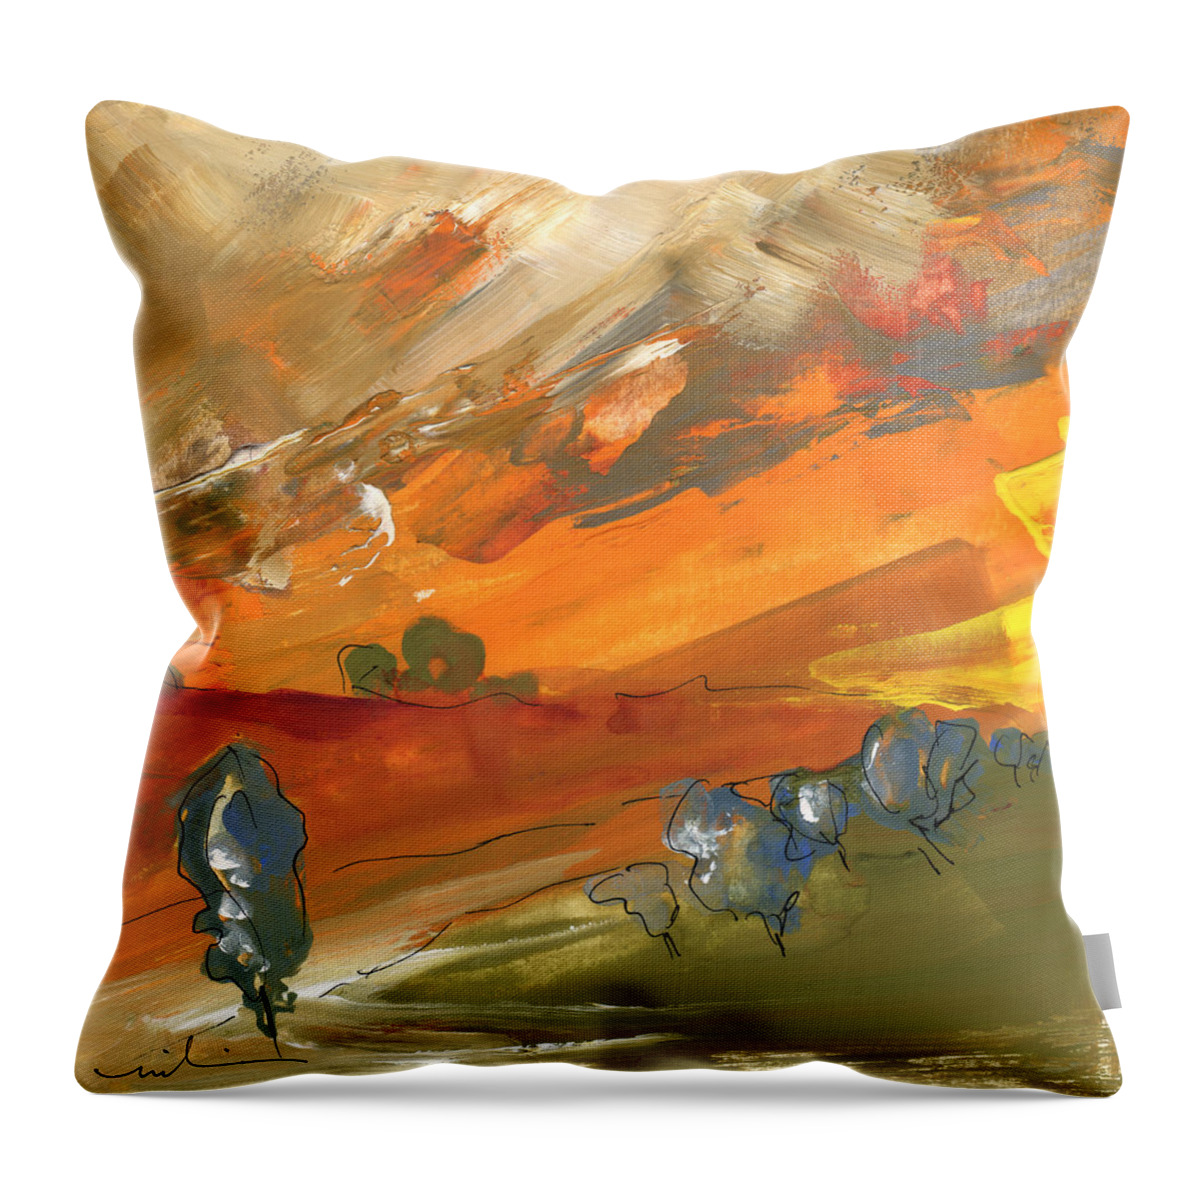 Travel Throw Pillow featuring the painting Ronda 02 by Miki De Goodaboom